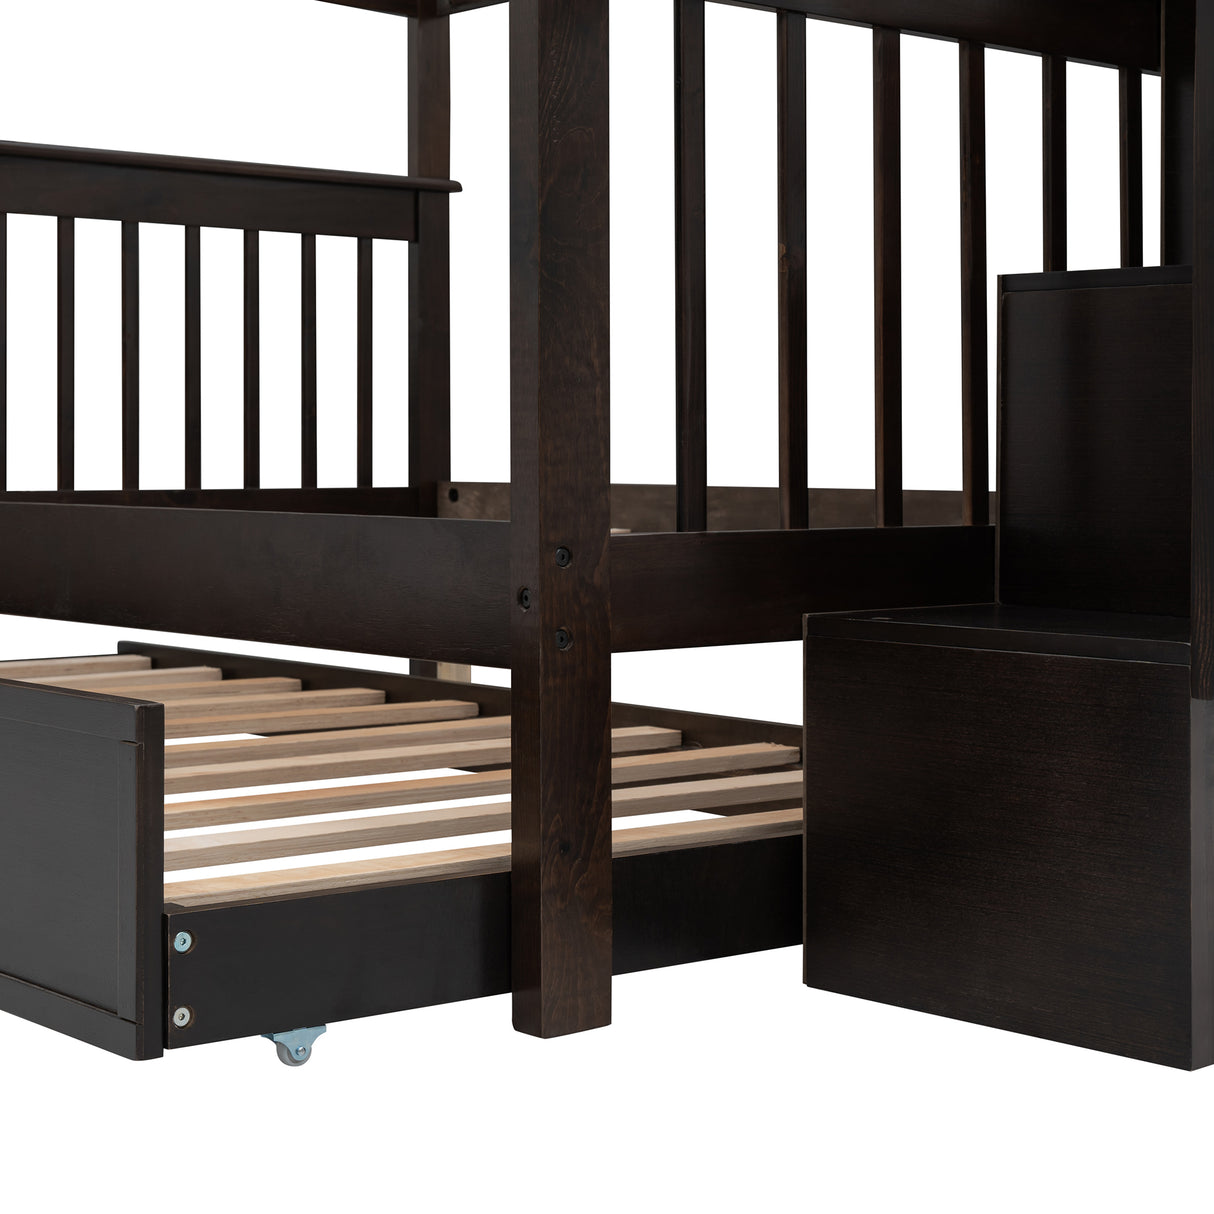 Stairway Full-Over-Full Bunk Bed with Twin size Trundle, Storage and Guard Rail for Bedroom, Dorm - Espresso(OLD SKU :LP001210AAP) - Home Elegance USA